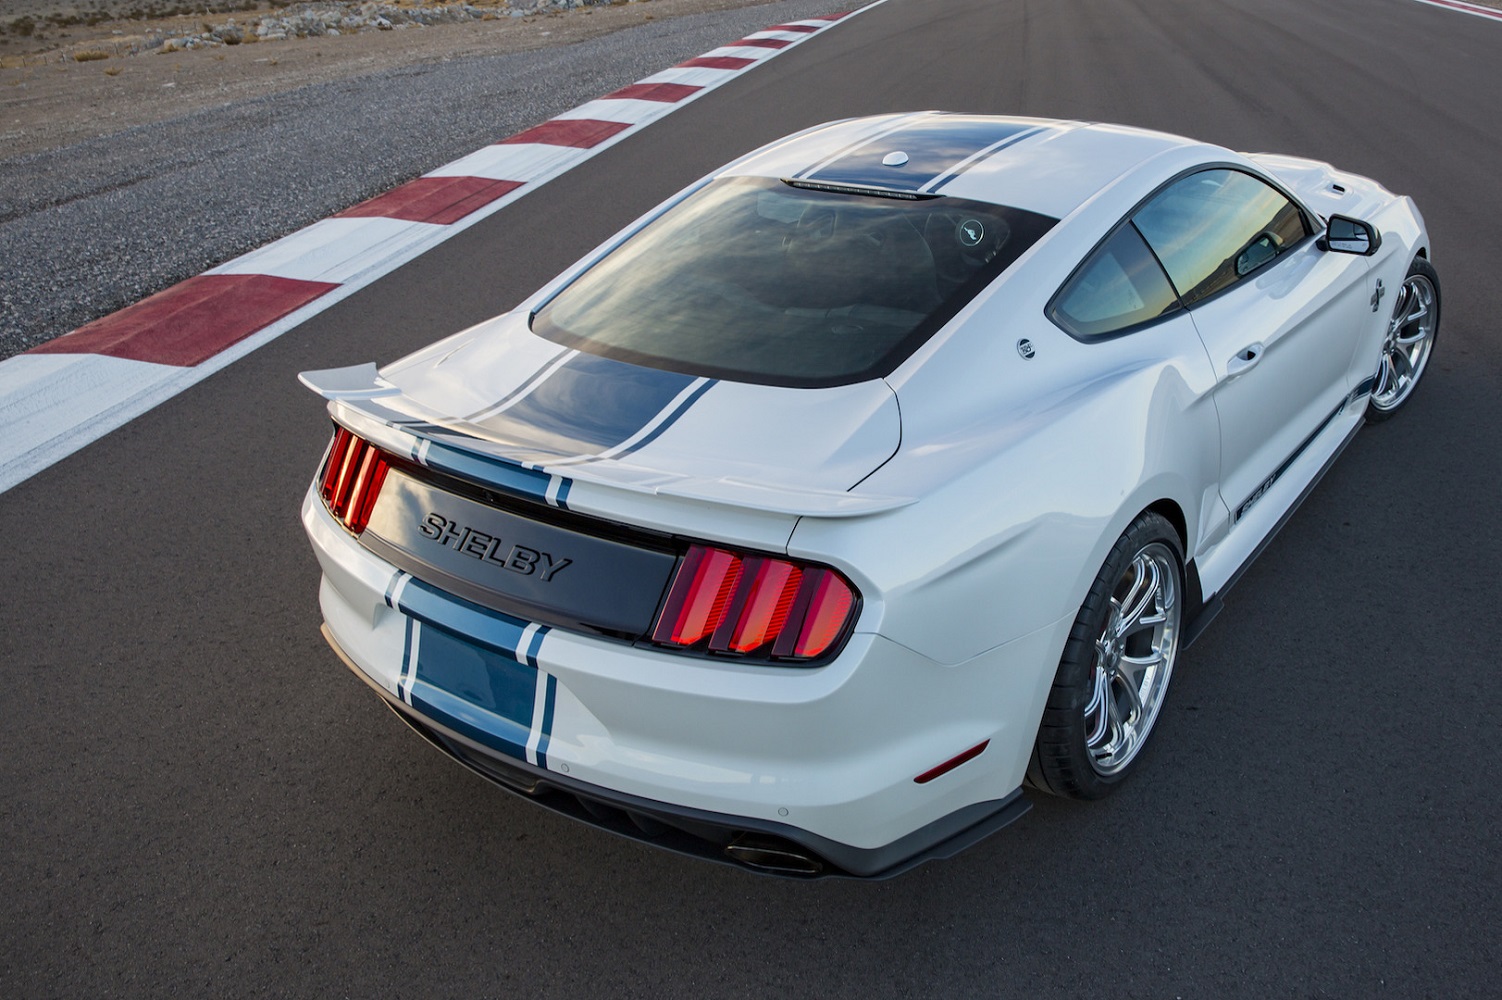 Shelby 50th Anniversary Super Snake